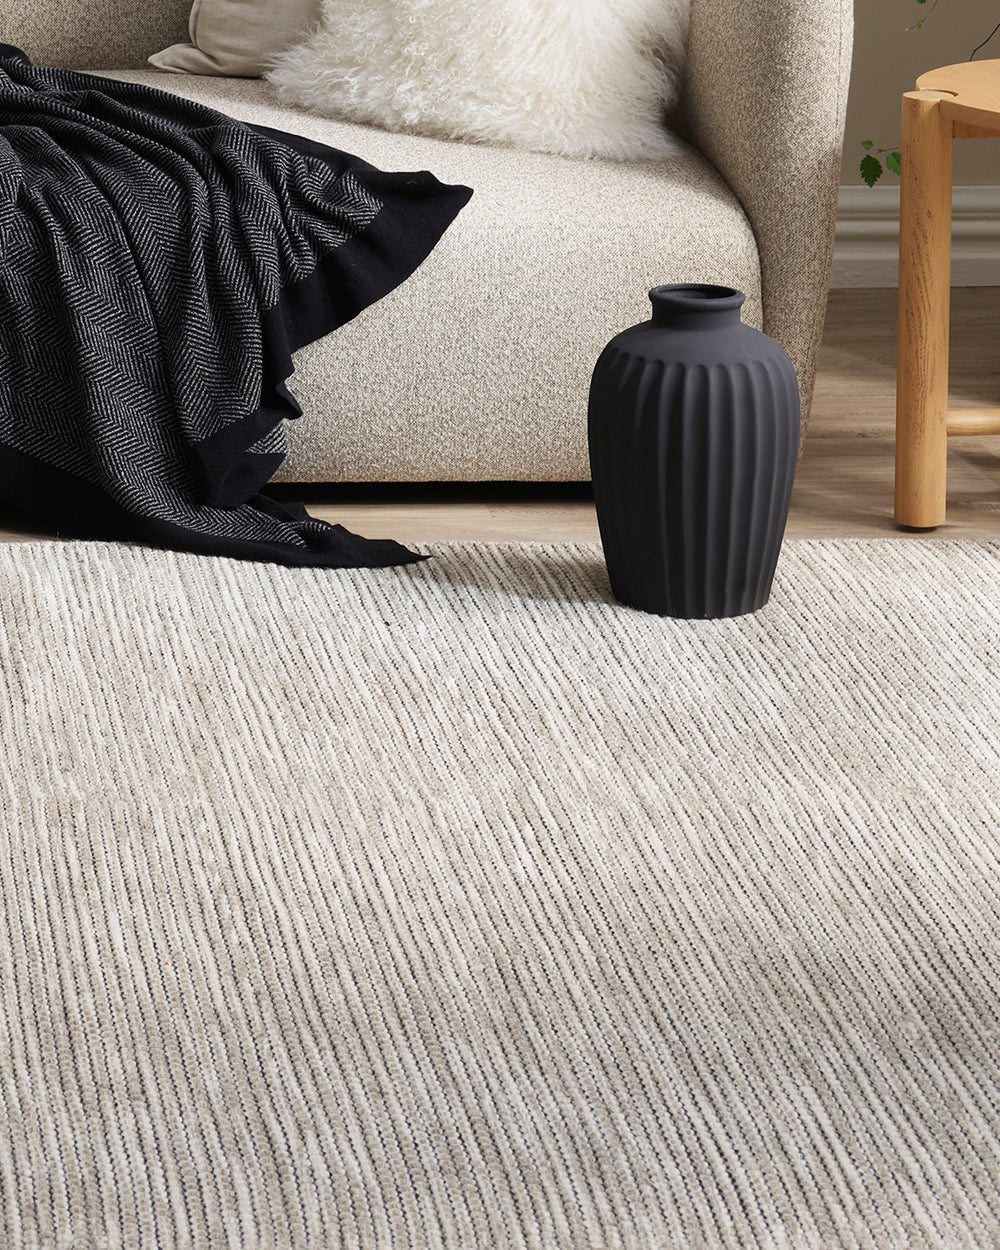 Abbas Floor Rug Tightly handwoven from a dense wool blend, the flatweave design and generous size of our Abbas makes this rug perfect for dining rooms and areas of high foot traffic. The mottled sand tone complements most interior styles and creates a ref